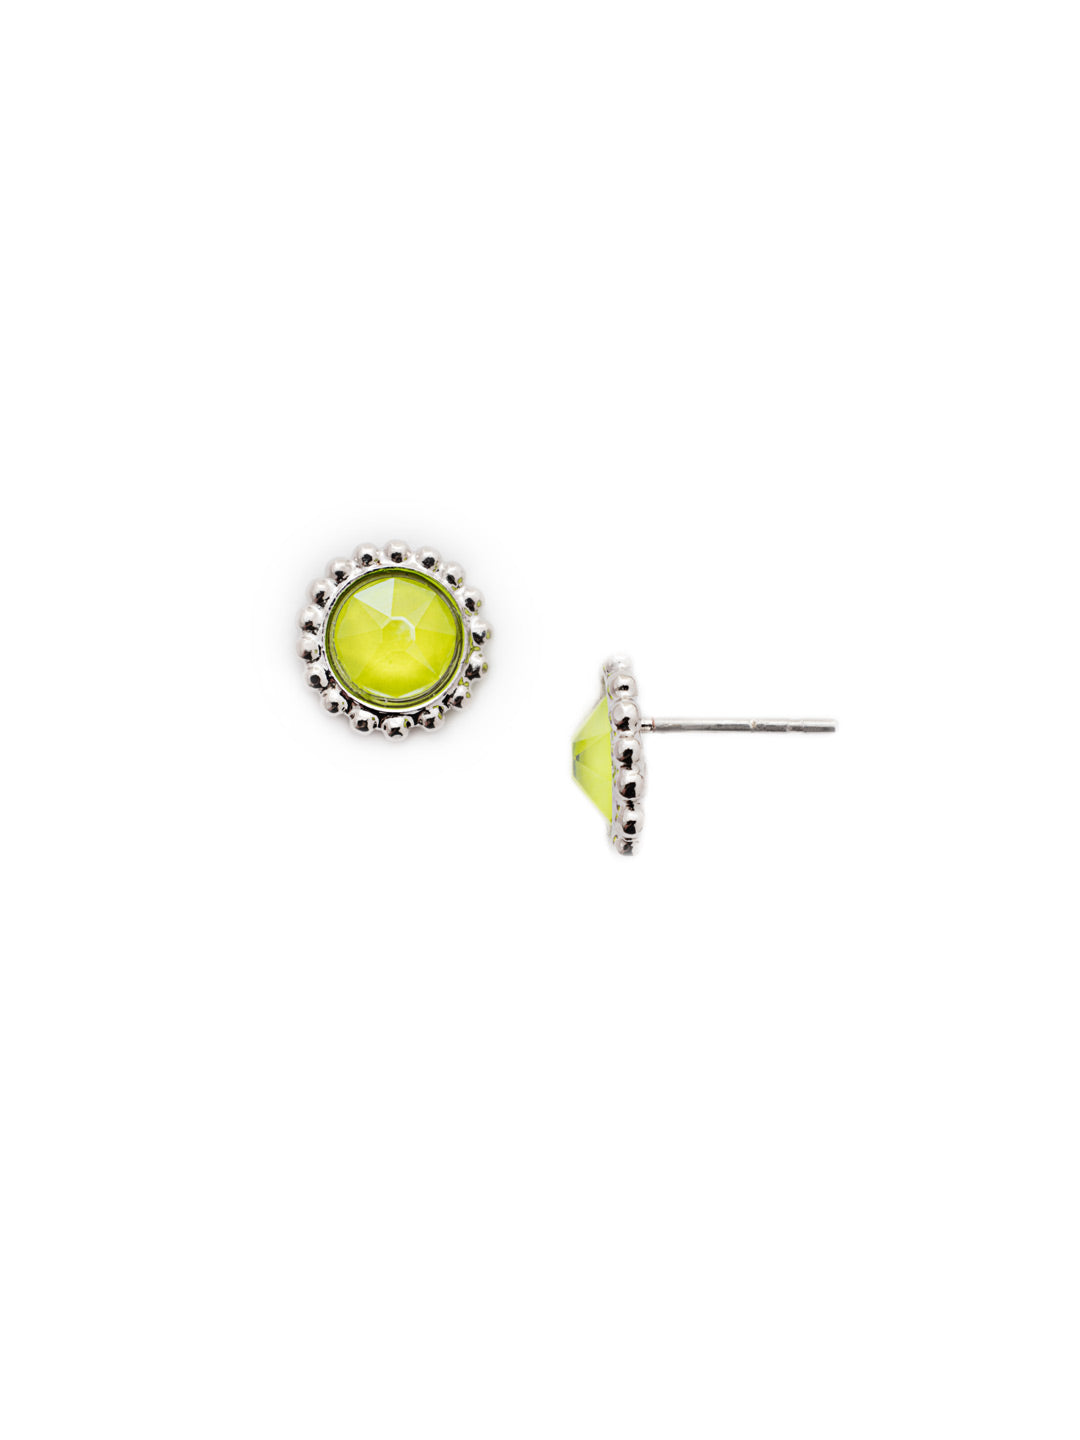 Simplicity Stud Earrings - EBY38PDBPY - <p>A timeless classic, the Simplicity Stud Earrings feature round cut crystals in a variety of colors; accented with a halo of metal beaded detail. Need help picking a stud? <a href="https://www.sorrelli.com/blogs/sisterhood/round-stud-earrings-101-a-rundown-of-sizes-styles-and-sparkle">Check out our size guide!</a> From Sorrelli's Blue Poppy collection in our Palladium finish.</p>